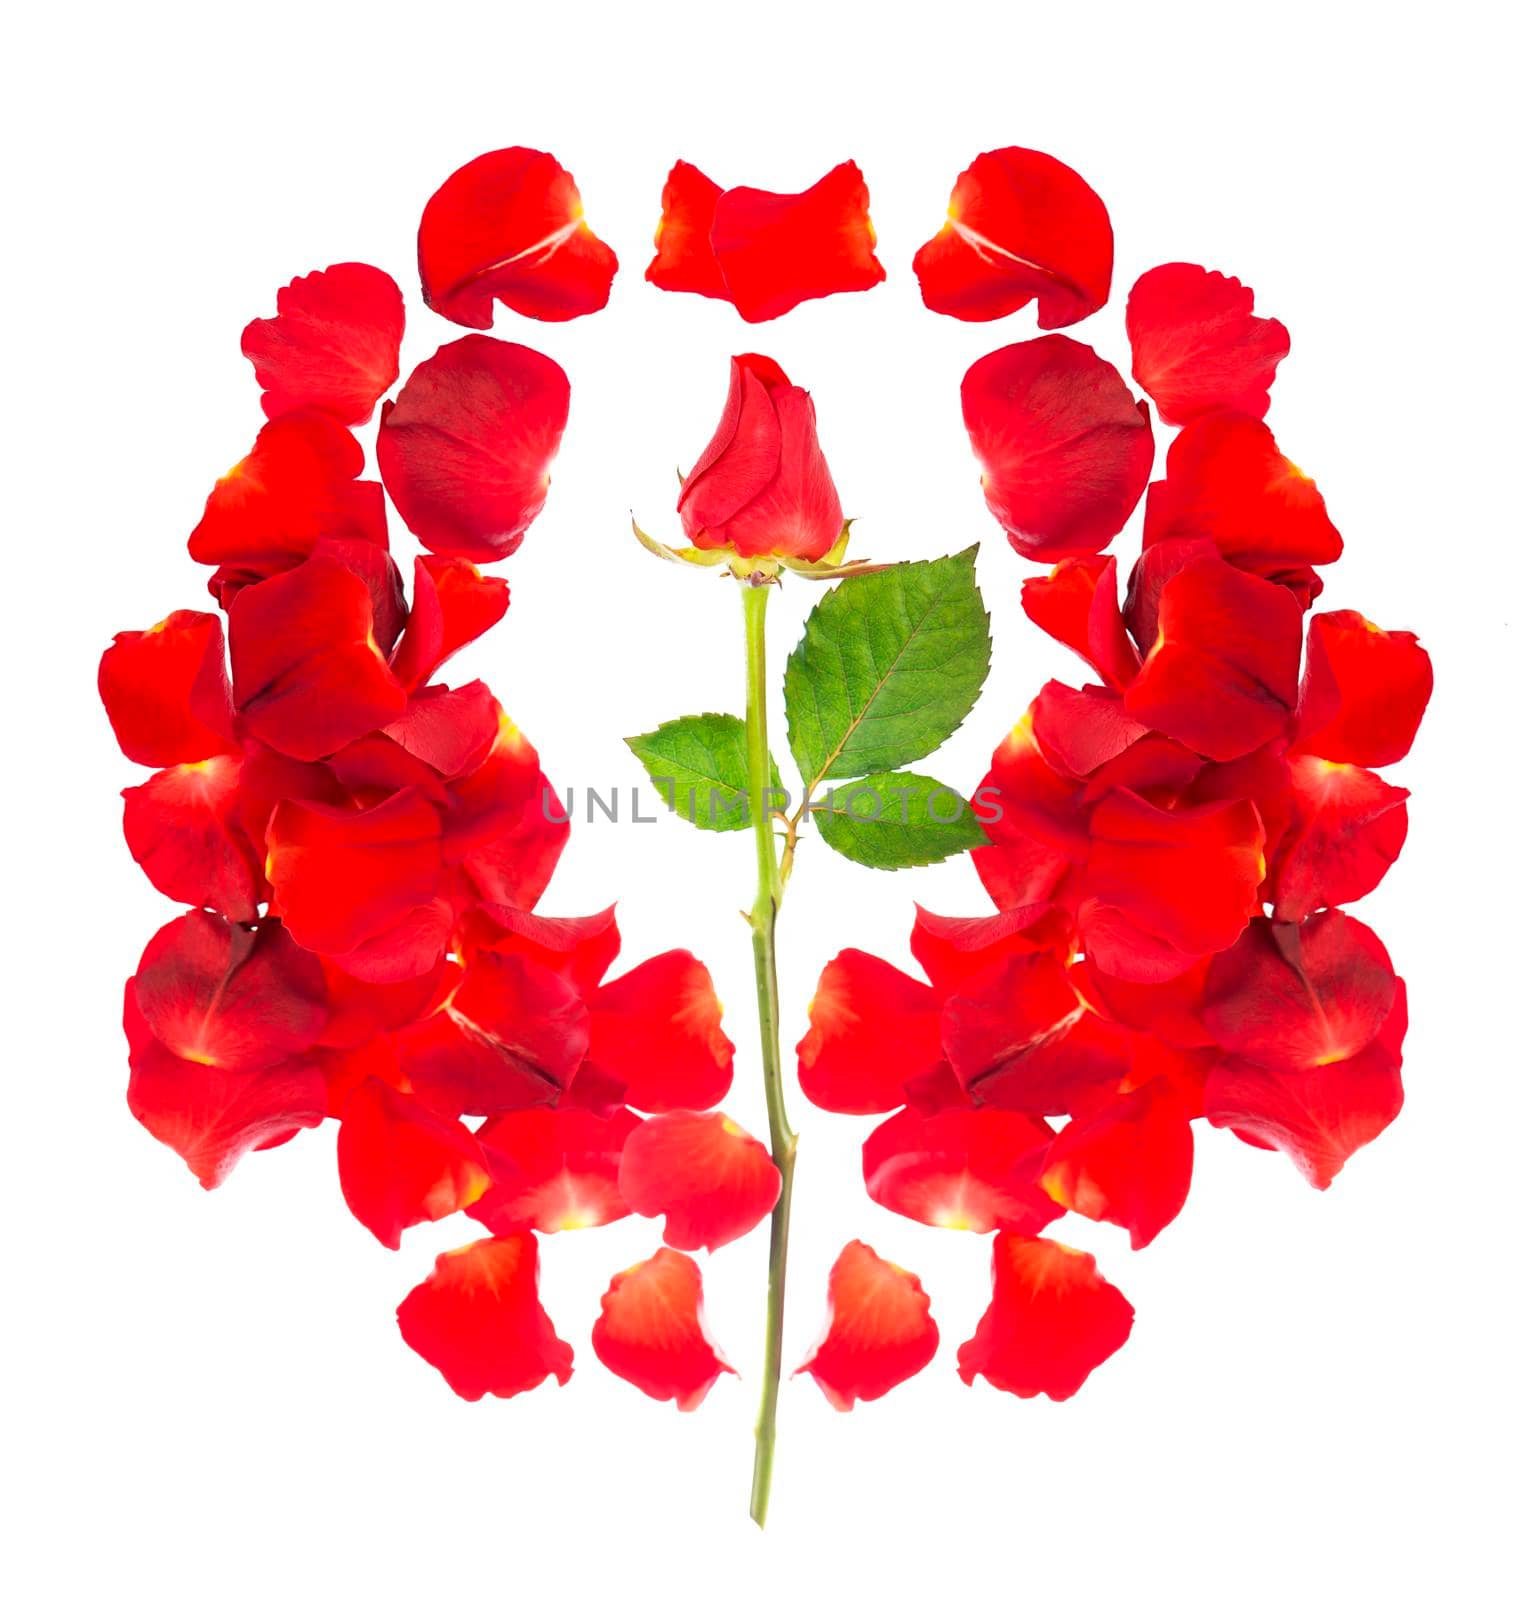 Red rose petals isolated over the white background by aprilphoto